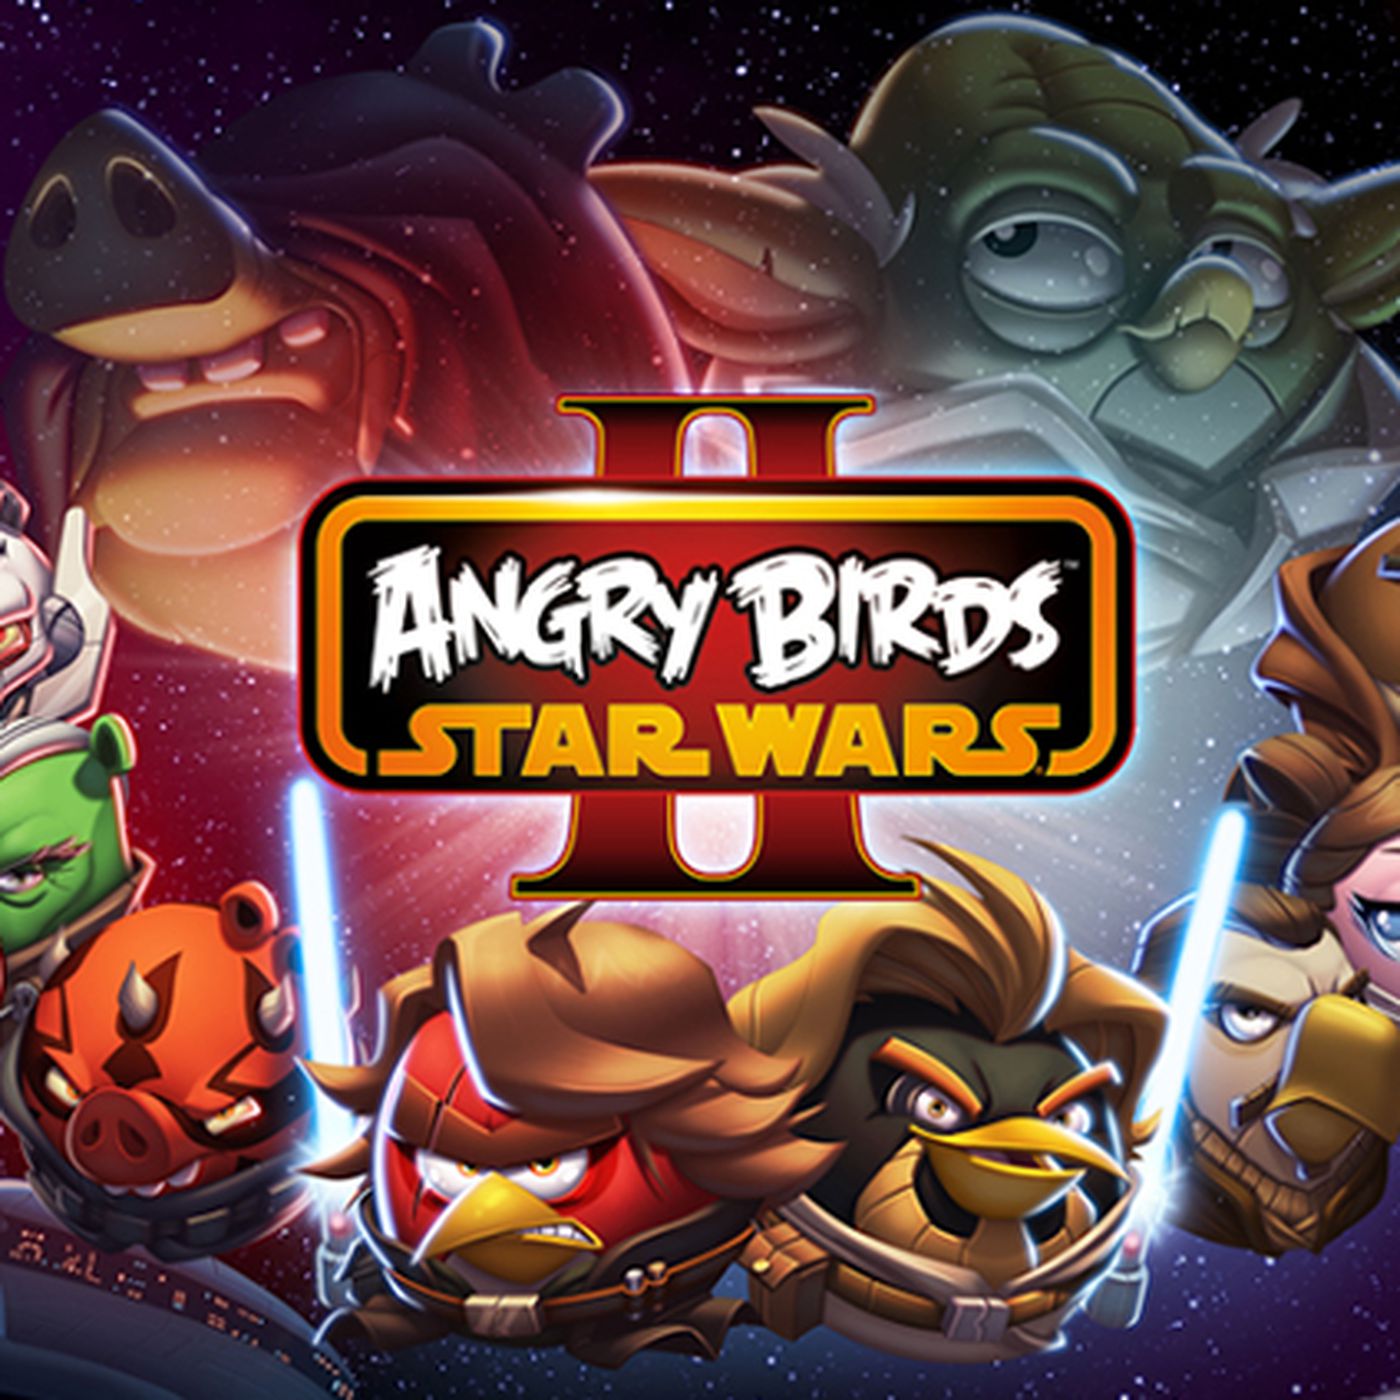 Pictures Of Angry Birds Star Wars Wallpapers